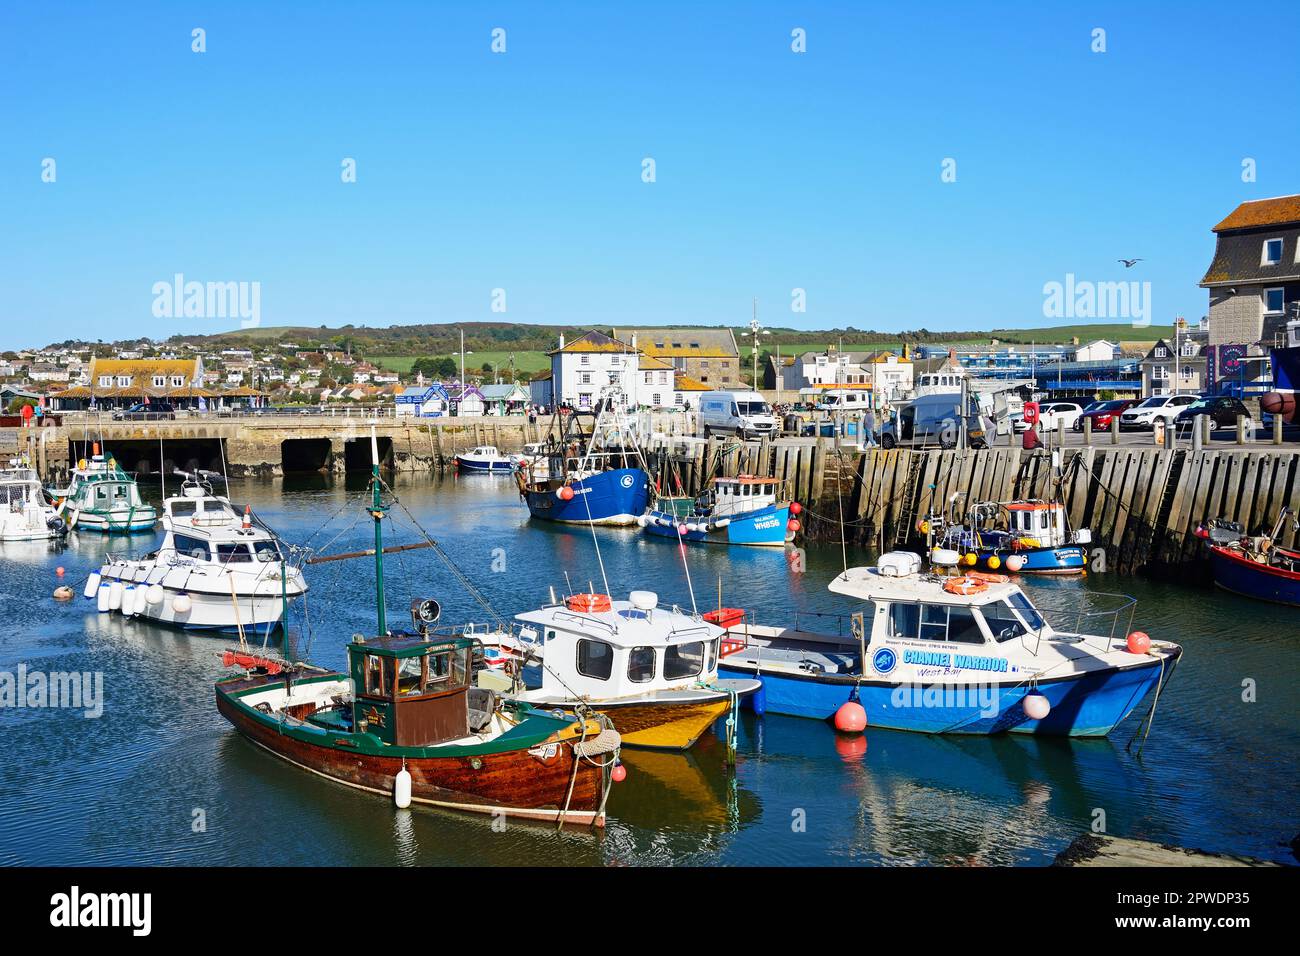 Fishing boats moored in the harbour with town buildings to the rear, West Bay, Dorset, UK, Europe. Stock Photo